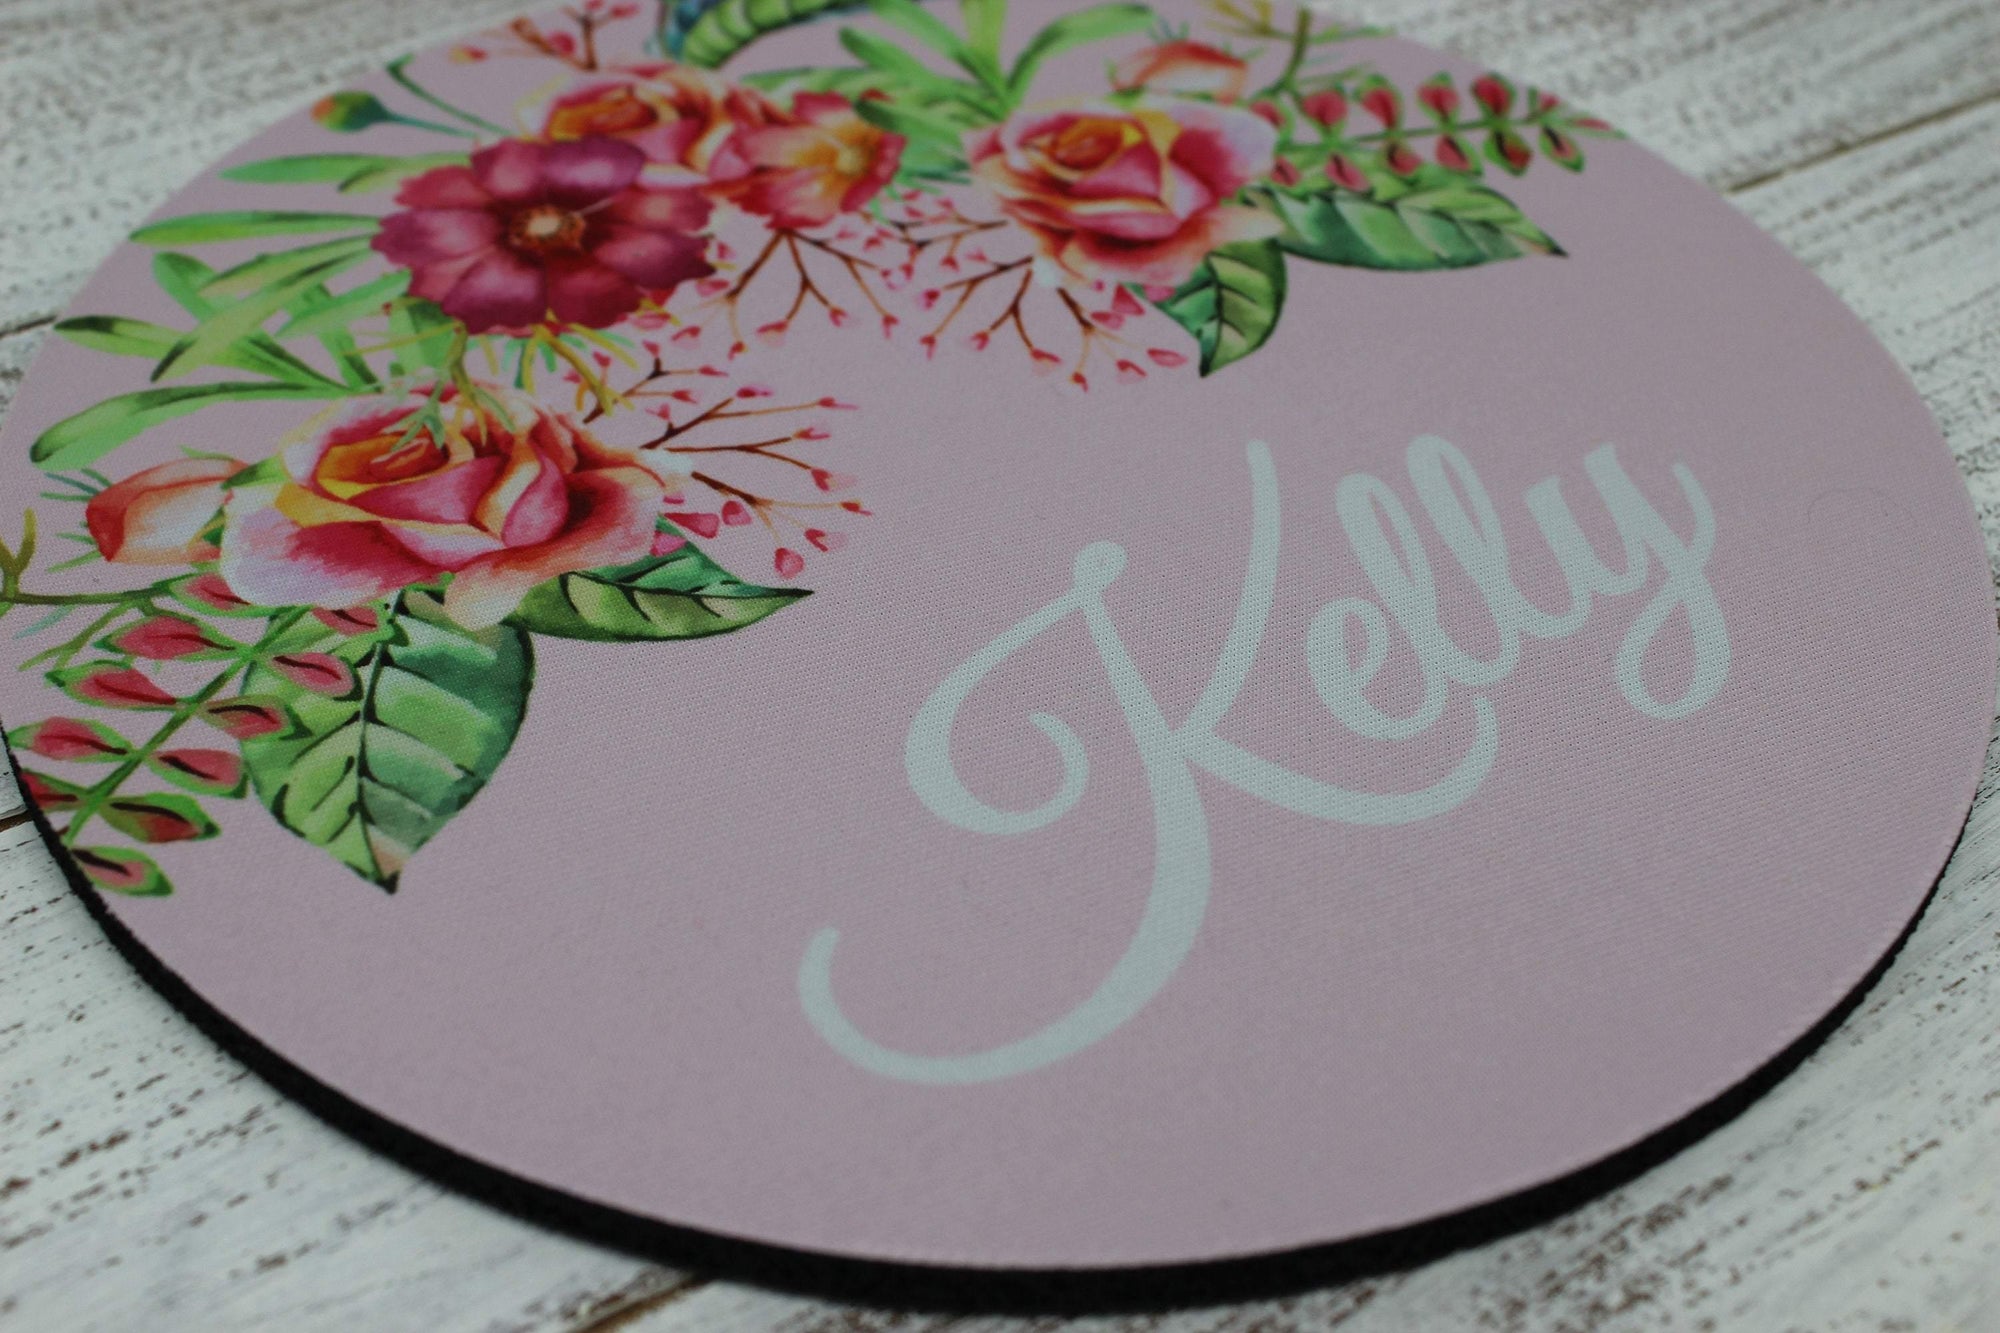 Monogrammed Mouse Pad | Personalized Mouse Pad | Floral - This & That Solutions - Monogrammed Mouse Pad | Personalized Mouse Pad | Floral - Personalized Gifts & Custom Home Decor